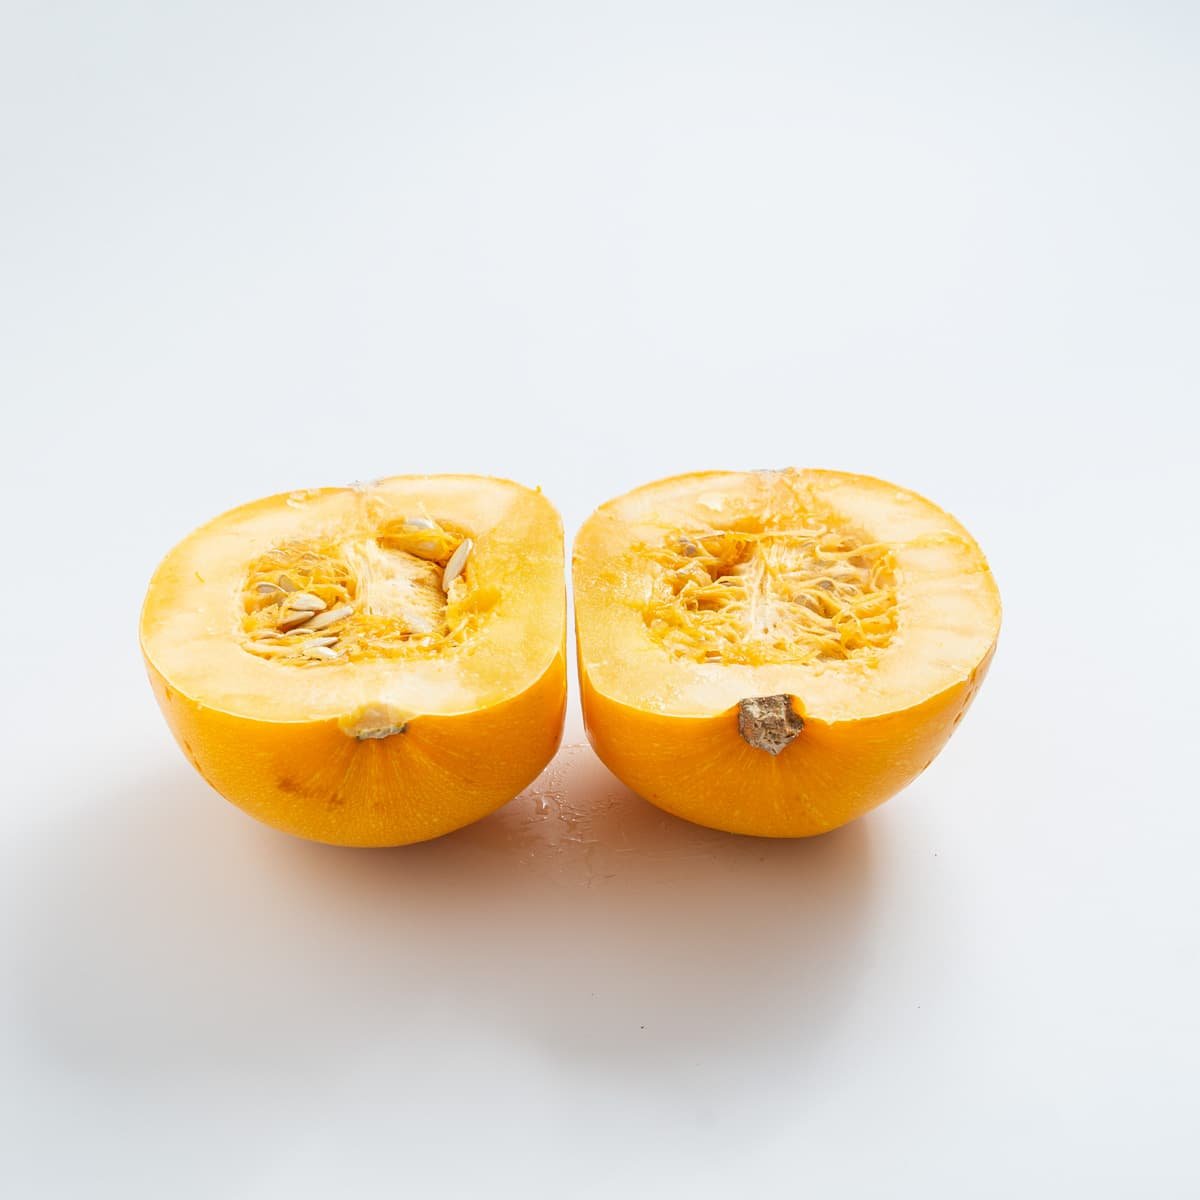 Overhead view showing the spaghetti squash cut into two halves. 